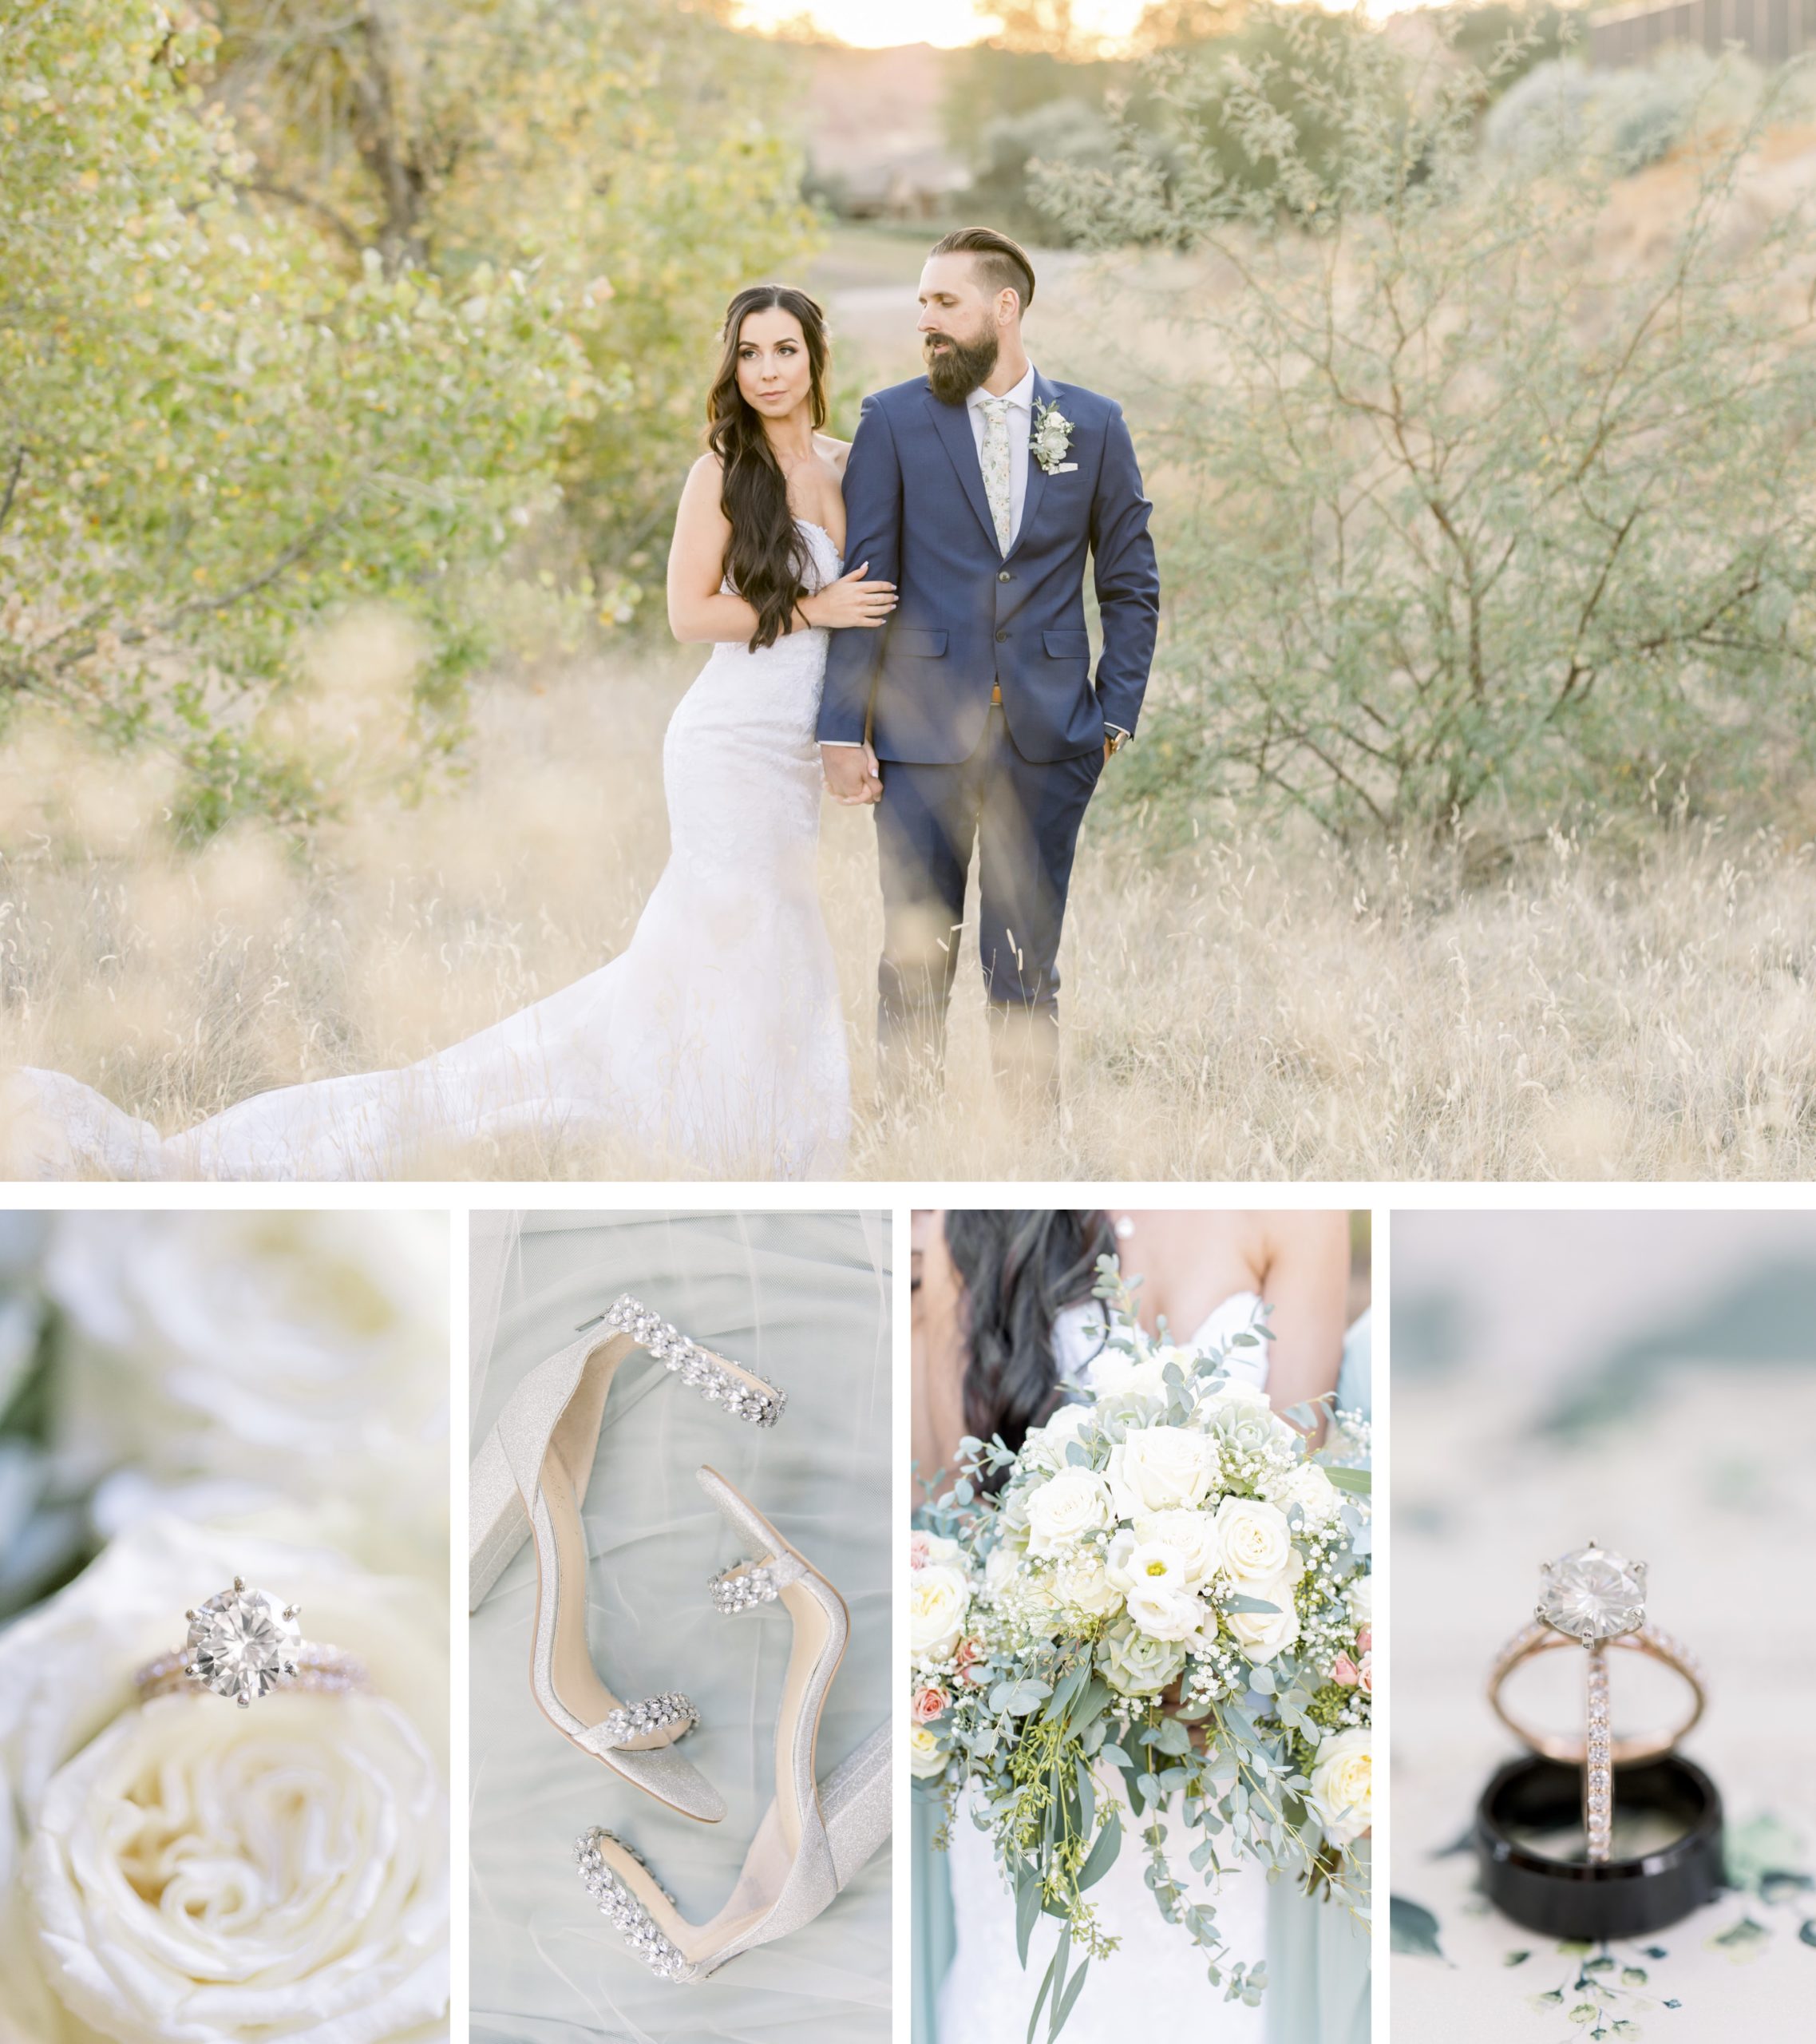 Sunset Photos, Husband and Wife pictures, Blue Suit, Desert Wedding Pictures, Wedding Day Timeline, Wedding Shoes, Baby Blue Bridesmaid Dress, Wedding Rings